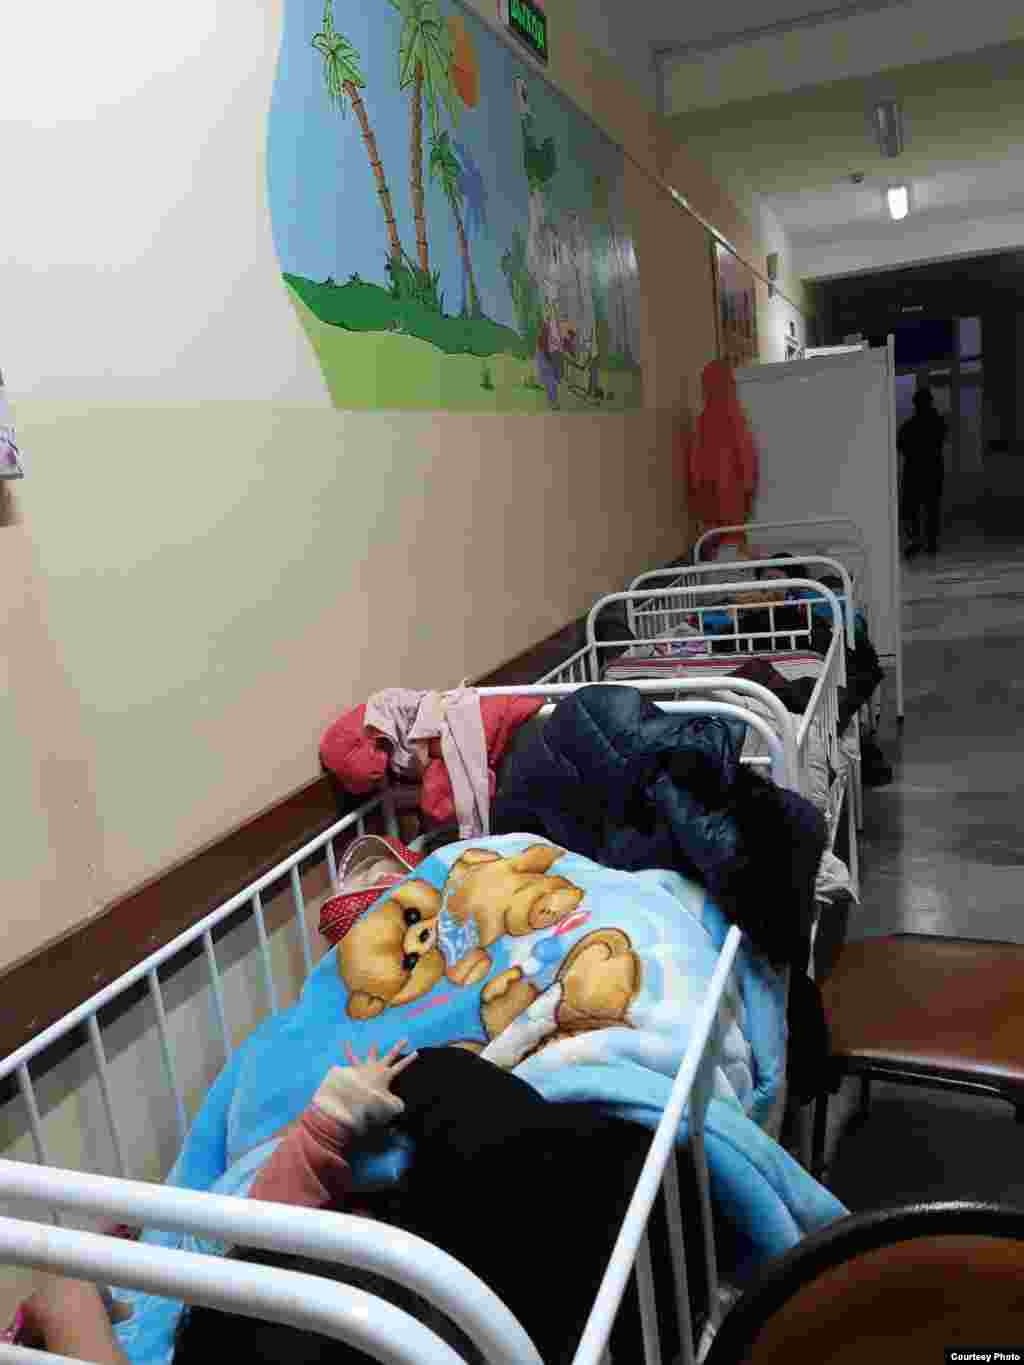 Uzbekistan - There is not enough room for sick children in Tashkent hospitals.